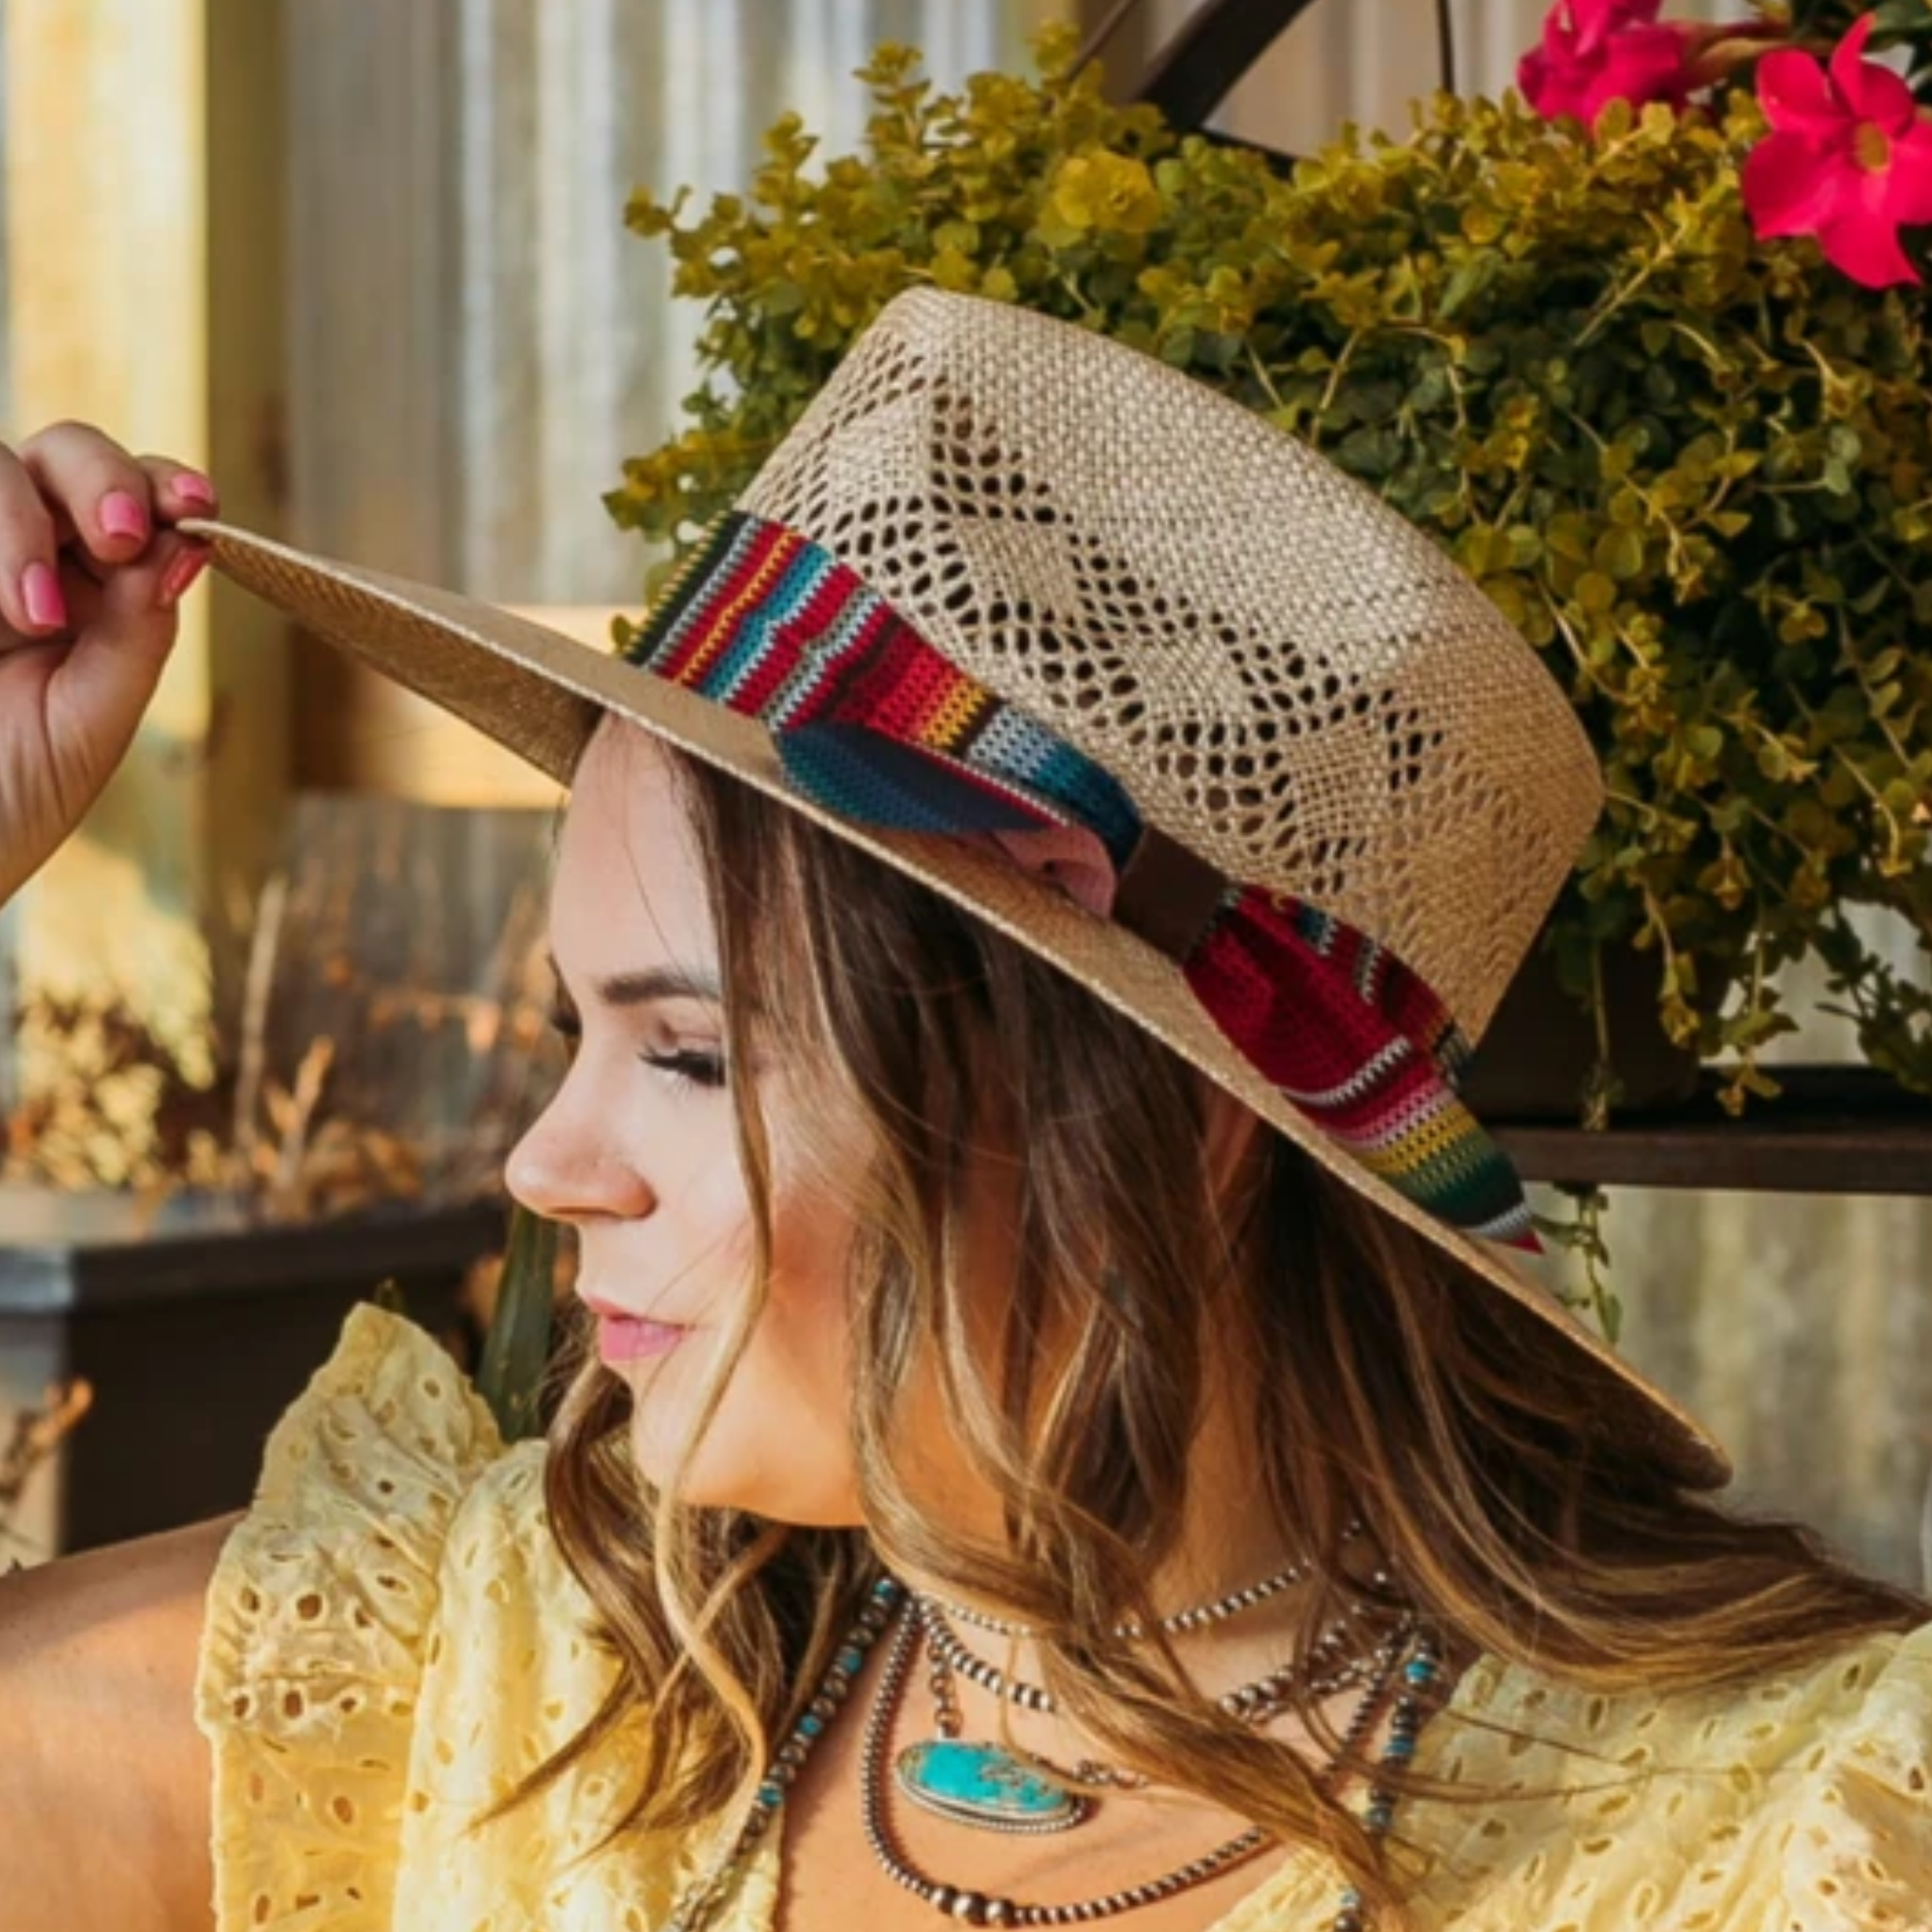 Charlie 1 Horse | Fiesta Straw Stiff Brim Hat with Serape Band in Natural - Giddy Up Glamour Boutique